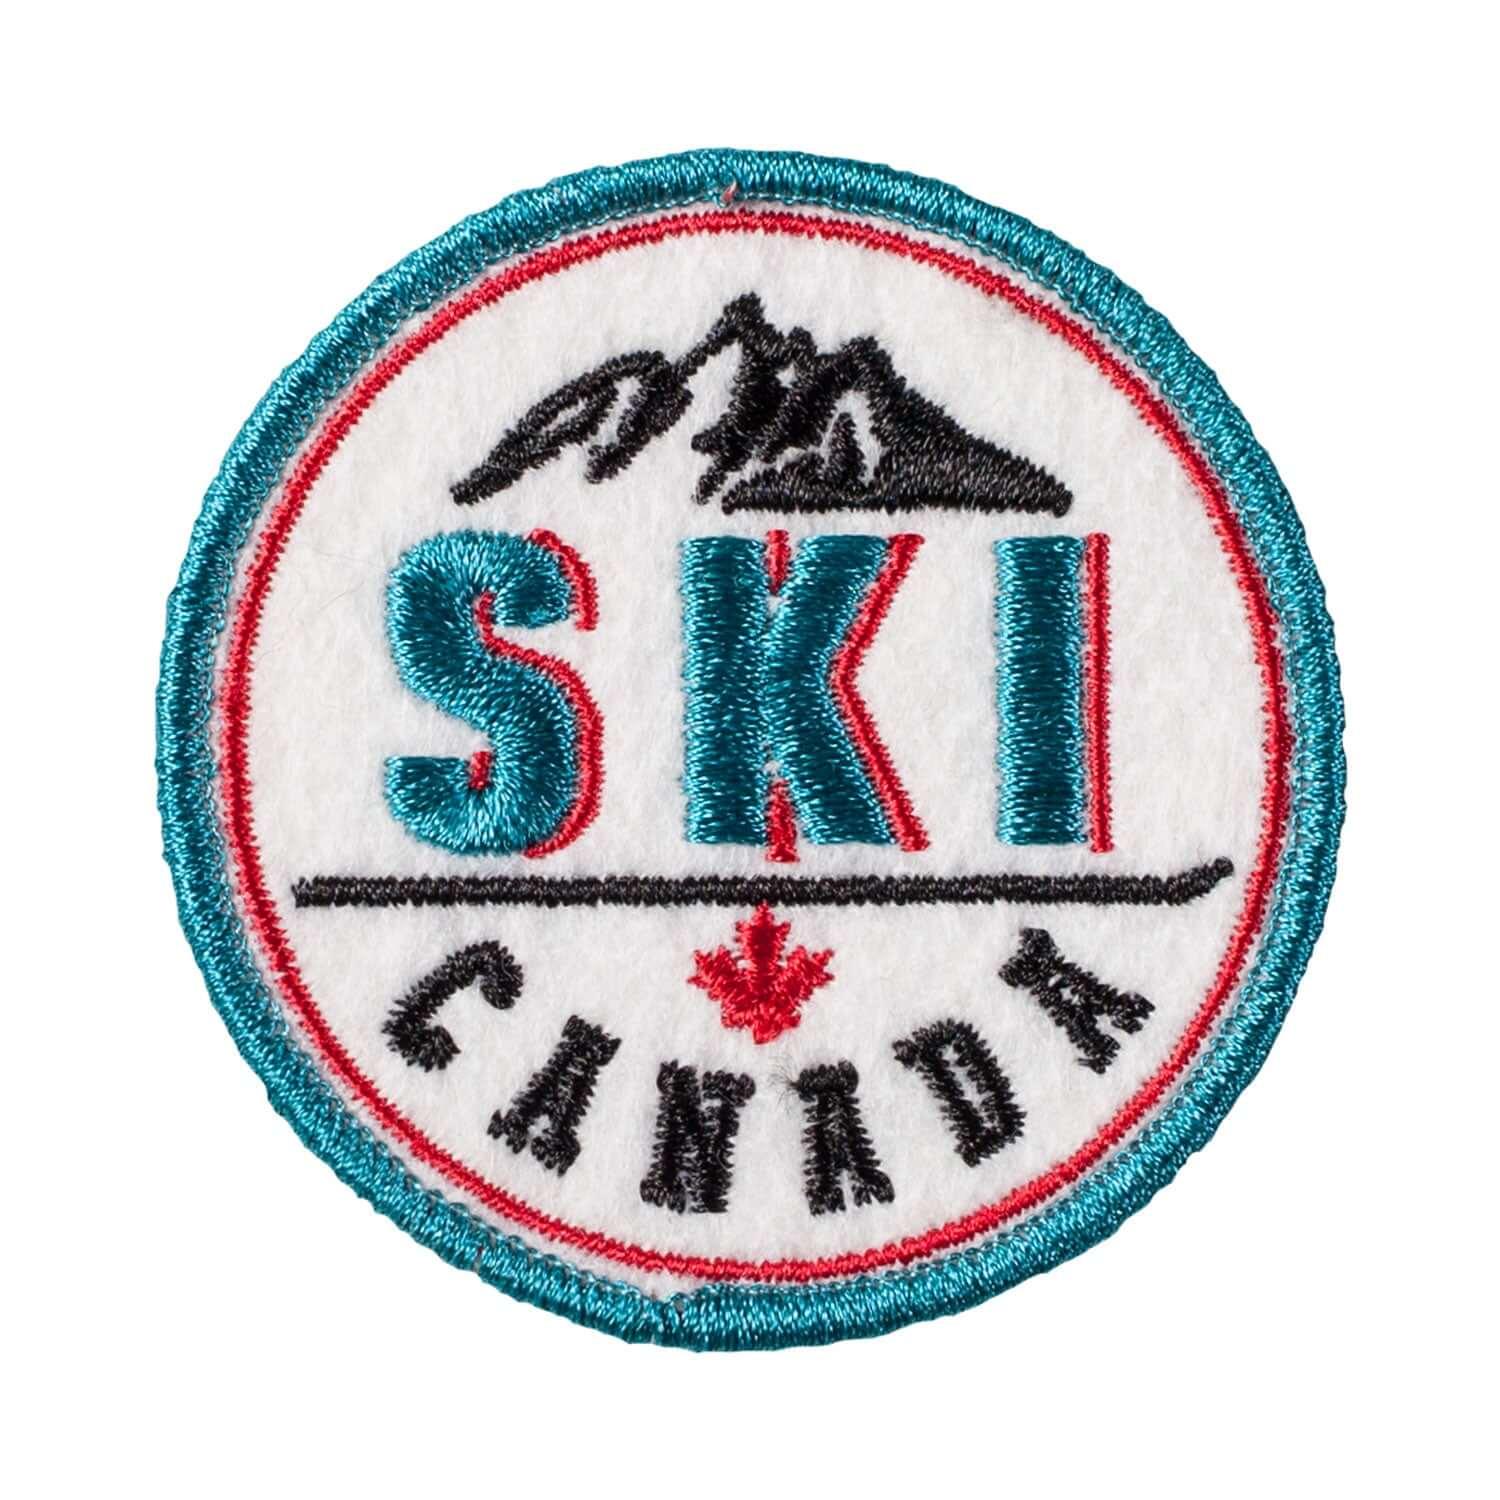 Ski Canada Iron On Patch - Rocket Factory Apparel